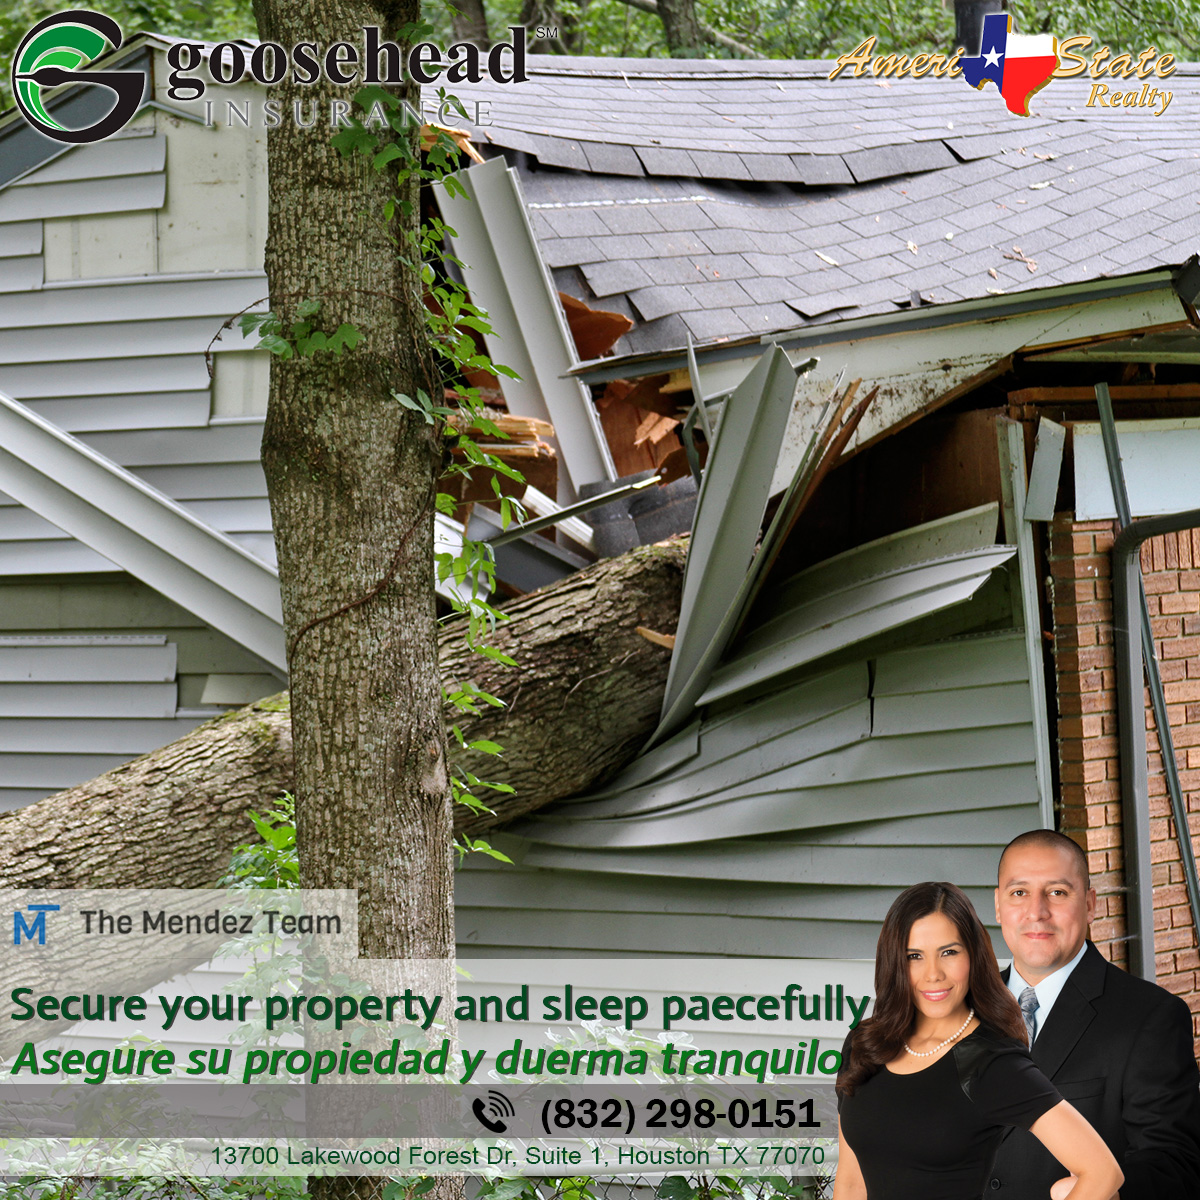 Now, we offer auto, home and flood insurance / Ahora